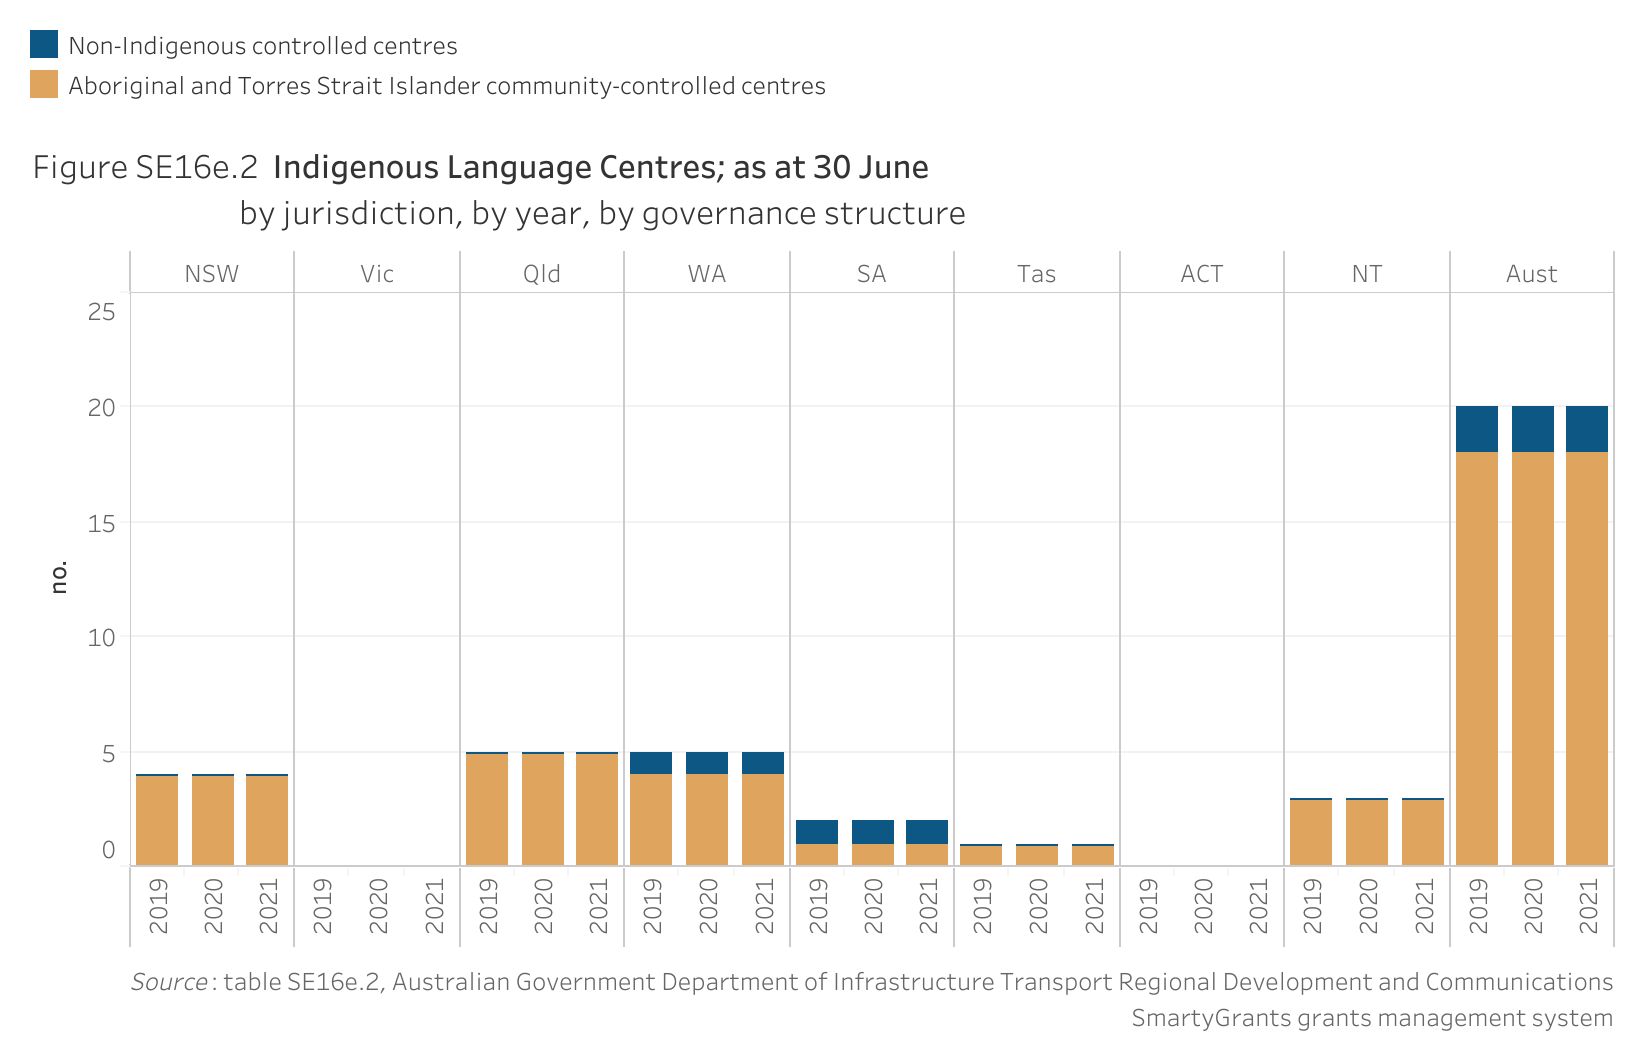 Figure SE16e.2. Bar chart showing the number of Indigenous Language Centres by governance structure at 30 June, by jurisdiction and by year. Data table of figure SE16e.2 is below.